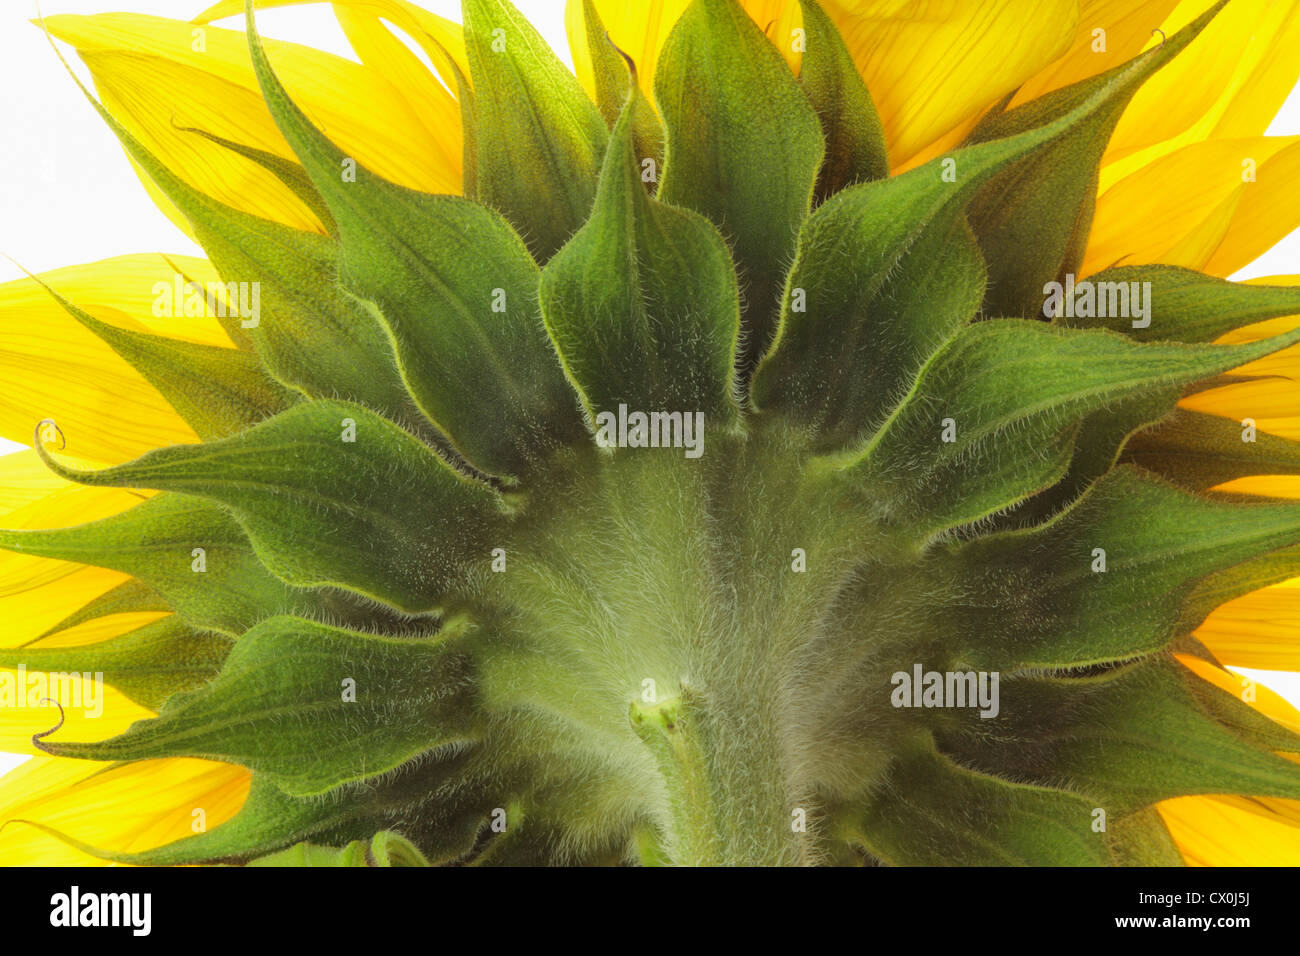 Close up of back of sunflower (Helianthus annuus) on white background Stock Photo